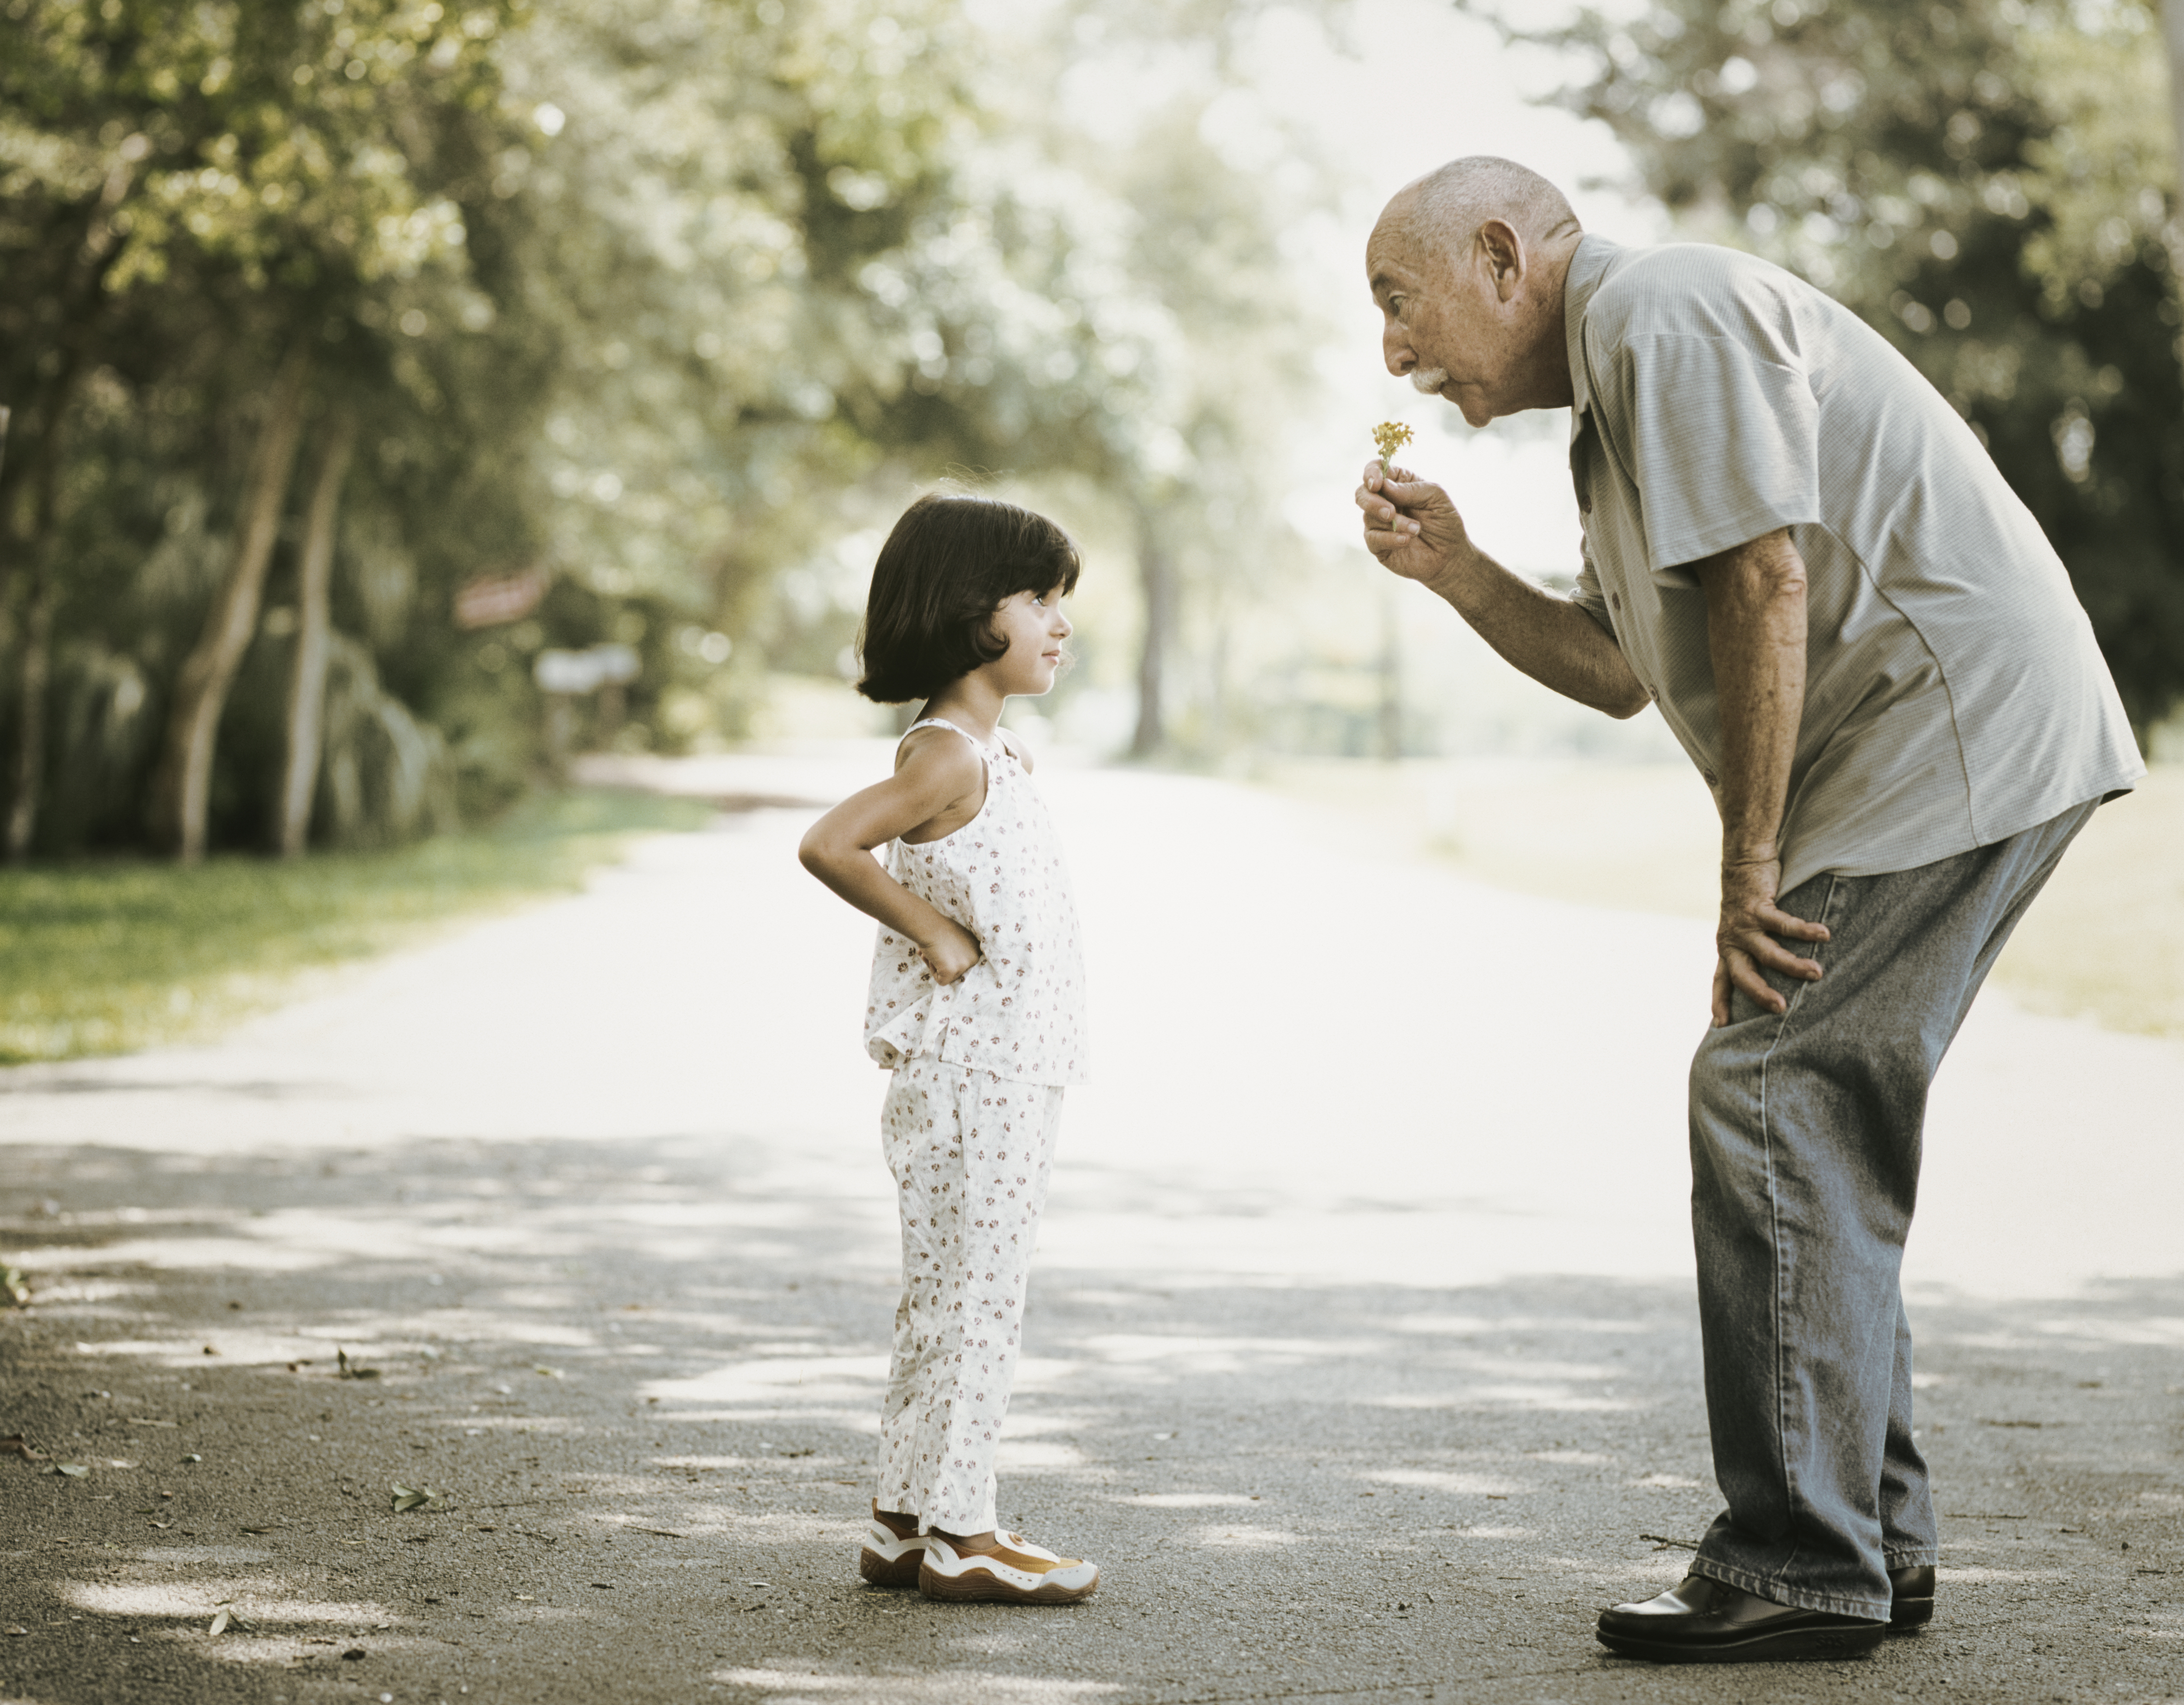 An old man giving a little girl a flower. | Source: Getty Images